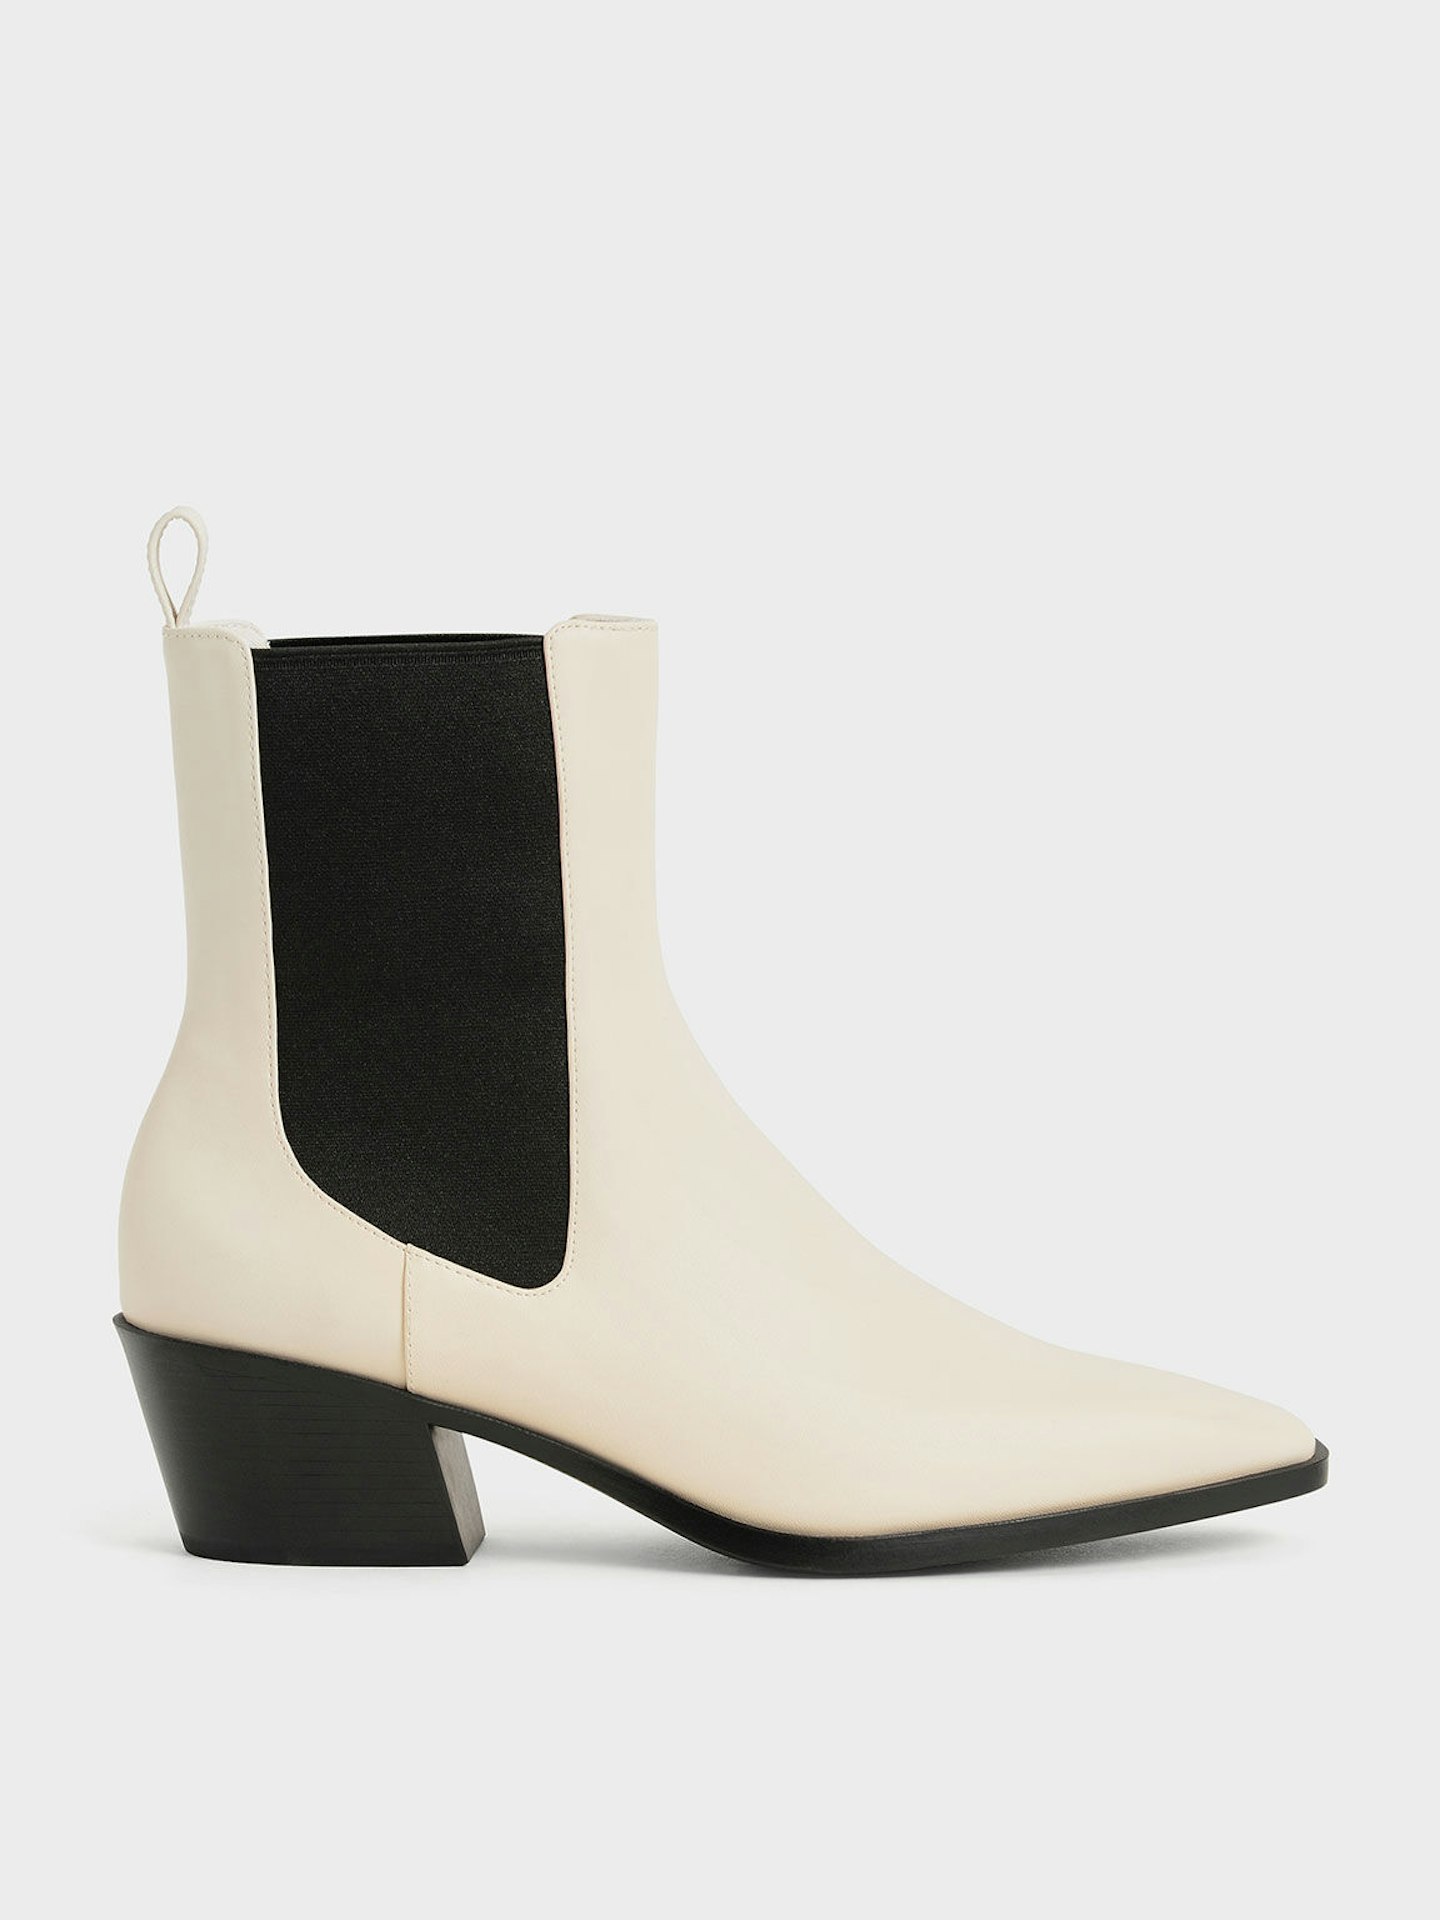 Sienna Miller Charles and Keith boots  Slanted Heel Chelsea Boots, WAS £79 NOW £56